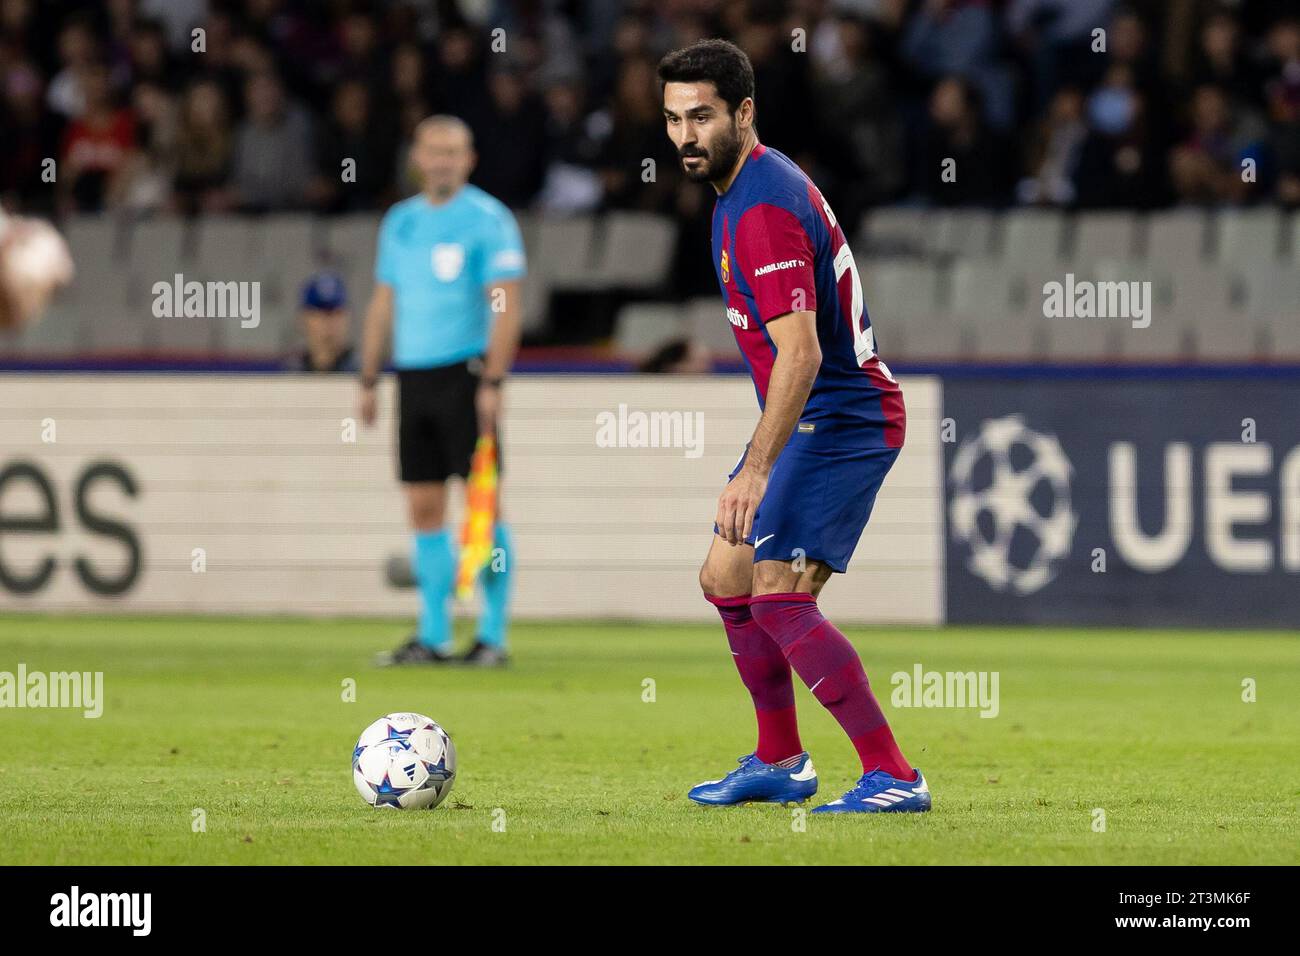 Barcelona, Spain. 25th Oct, 2023. BARCELONA, SPAIN - OCTOBER 25: Ilkay Gundogan of FC Barcelona during the UEFA Champions League match between FC Barcelona and FC Shakhtar Donetsk at the Estadi Olimpic Lluis Companys on October 25, 2023 in Barcelona, Spain Credit: DAX Images/Alamy Live News Stock Photo